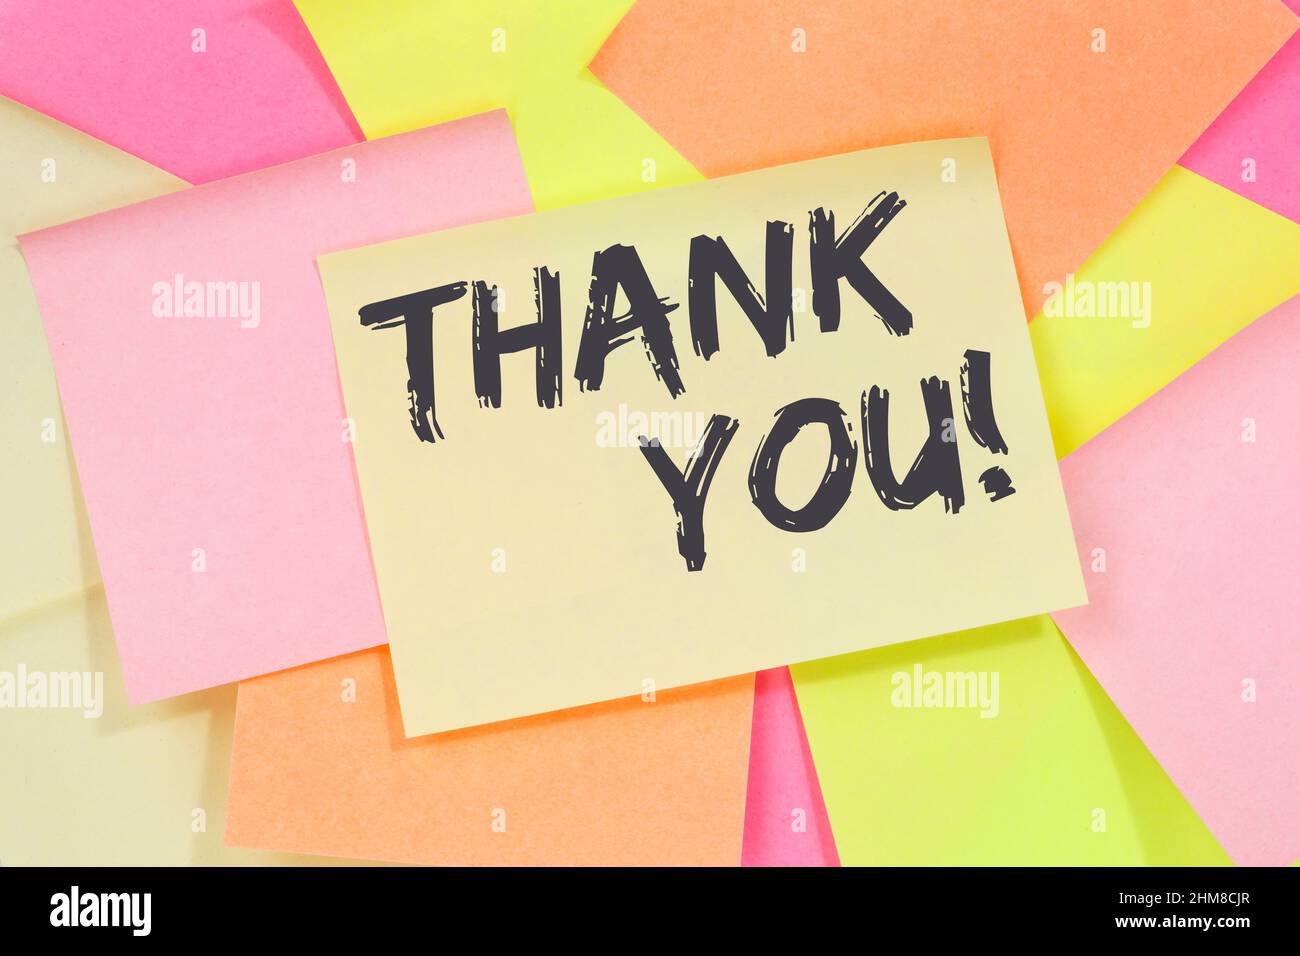 Thank you on notepaper office business concept note paper notpaper Stock Photo